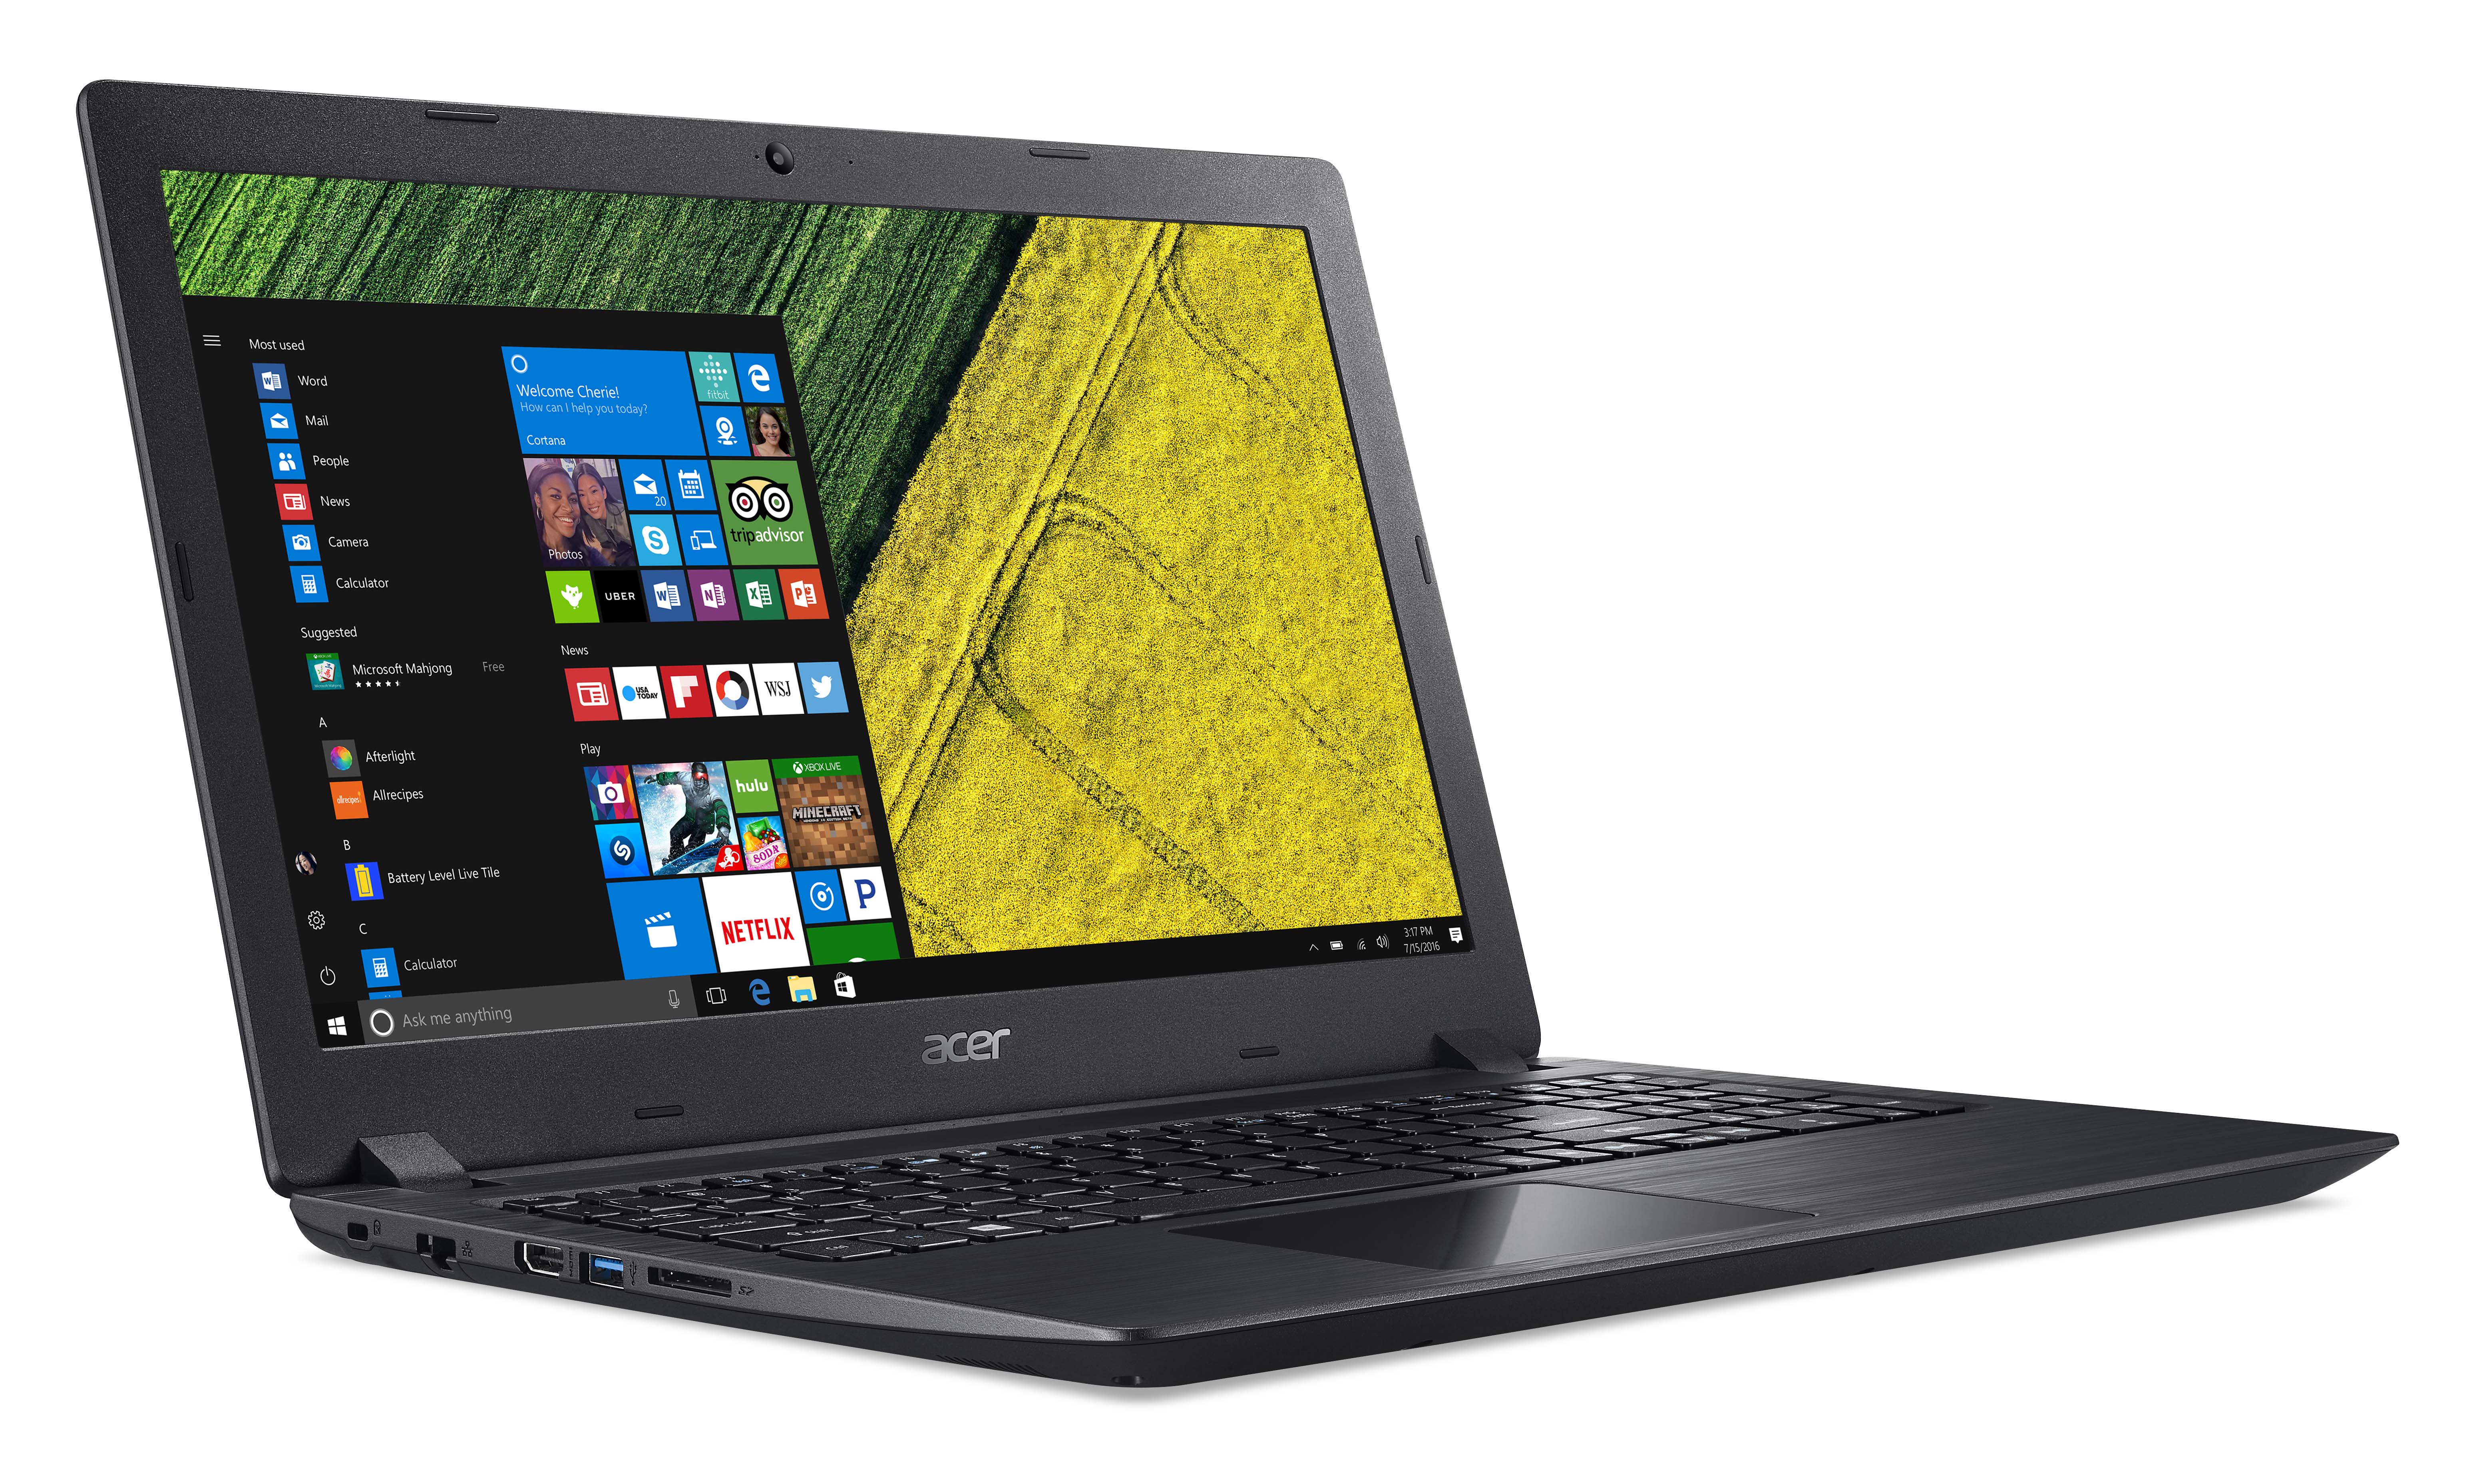 The Acer Aspire 3 with Windows 10